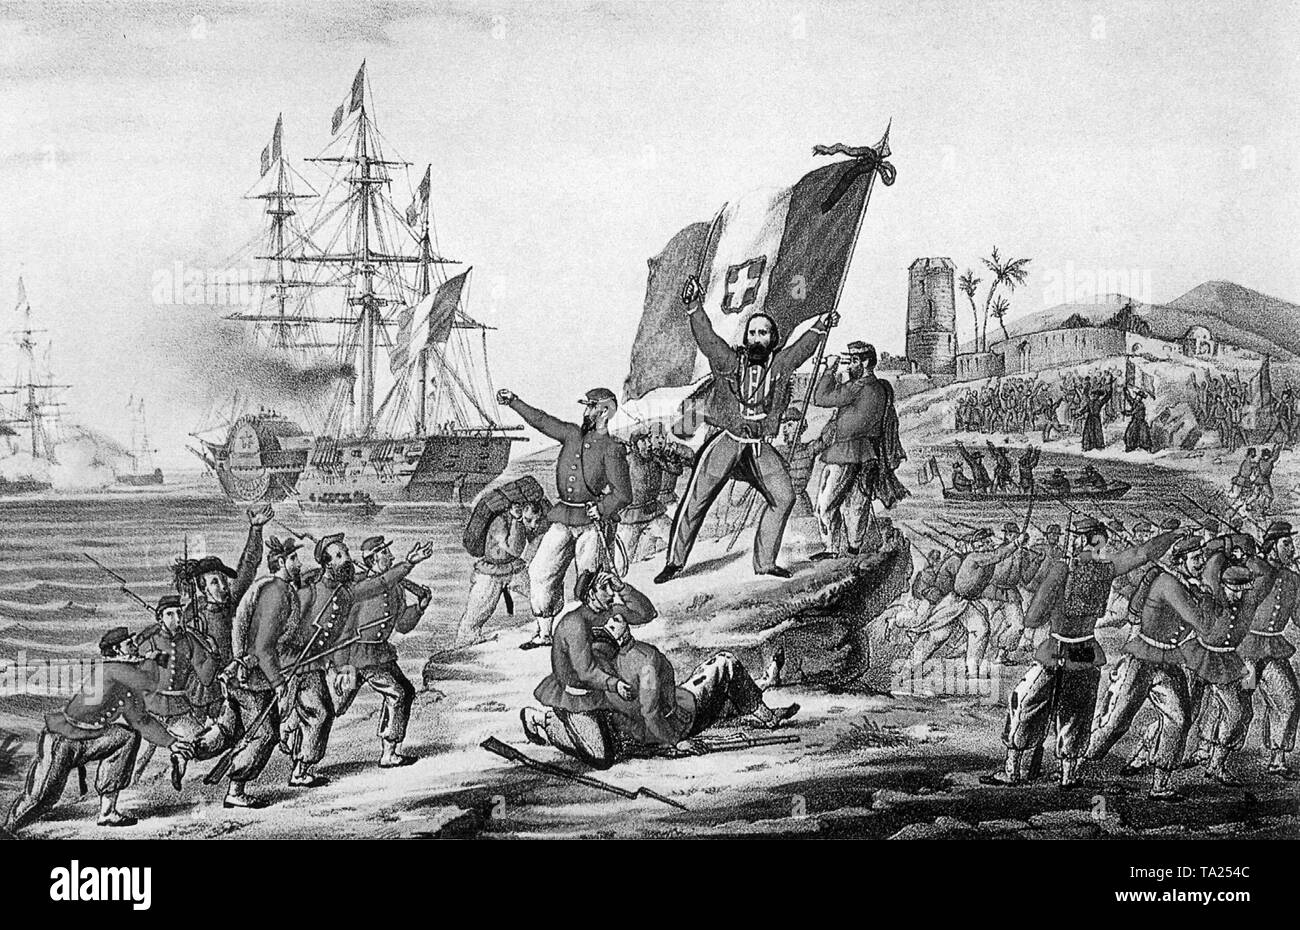 The Expedition of the Thousand (Italian Spedizione dei Mille) where corps of volunteers led by Giuseppe Garibaldi landed in Sicily in order to conquer the Kingdom of the Two Sicilies, ruled by the Bourbons. Illustration of Garibaldi after the landing in Marsala with the new Italian flag in his hand on May 11. 1860 Stock Photo